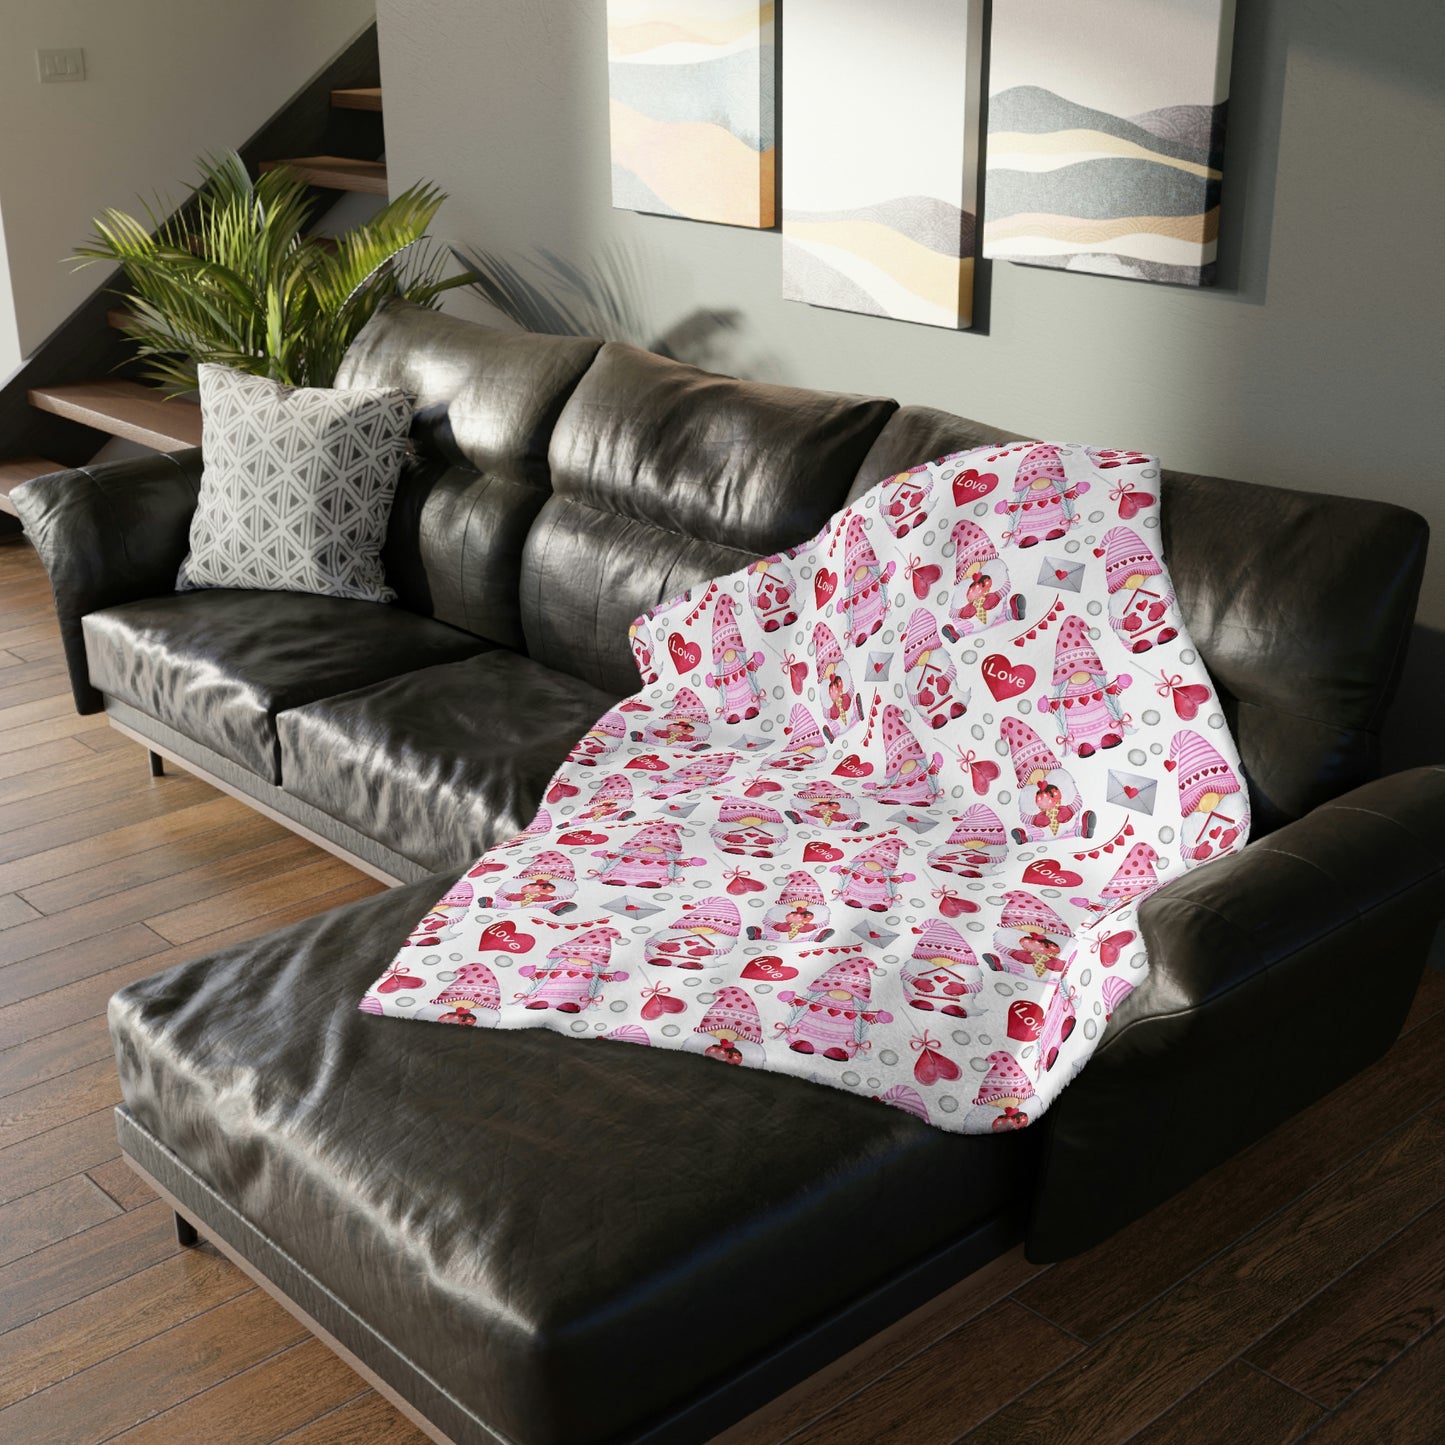 Gnomes and Hearts Velveteen Minky Blanket (Two-sided print)